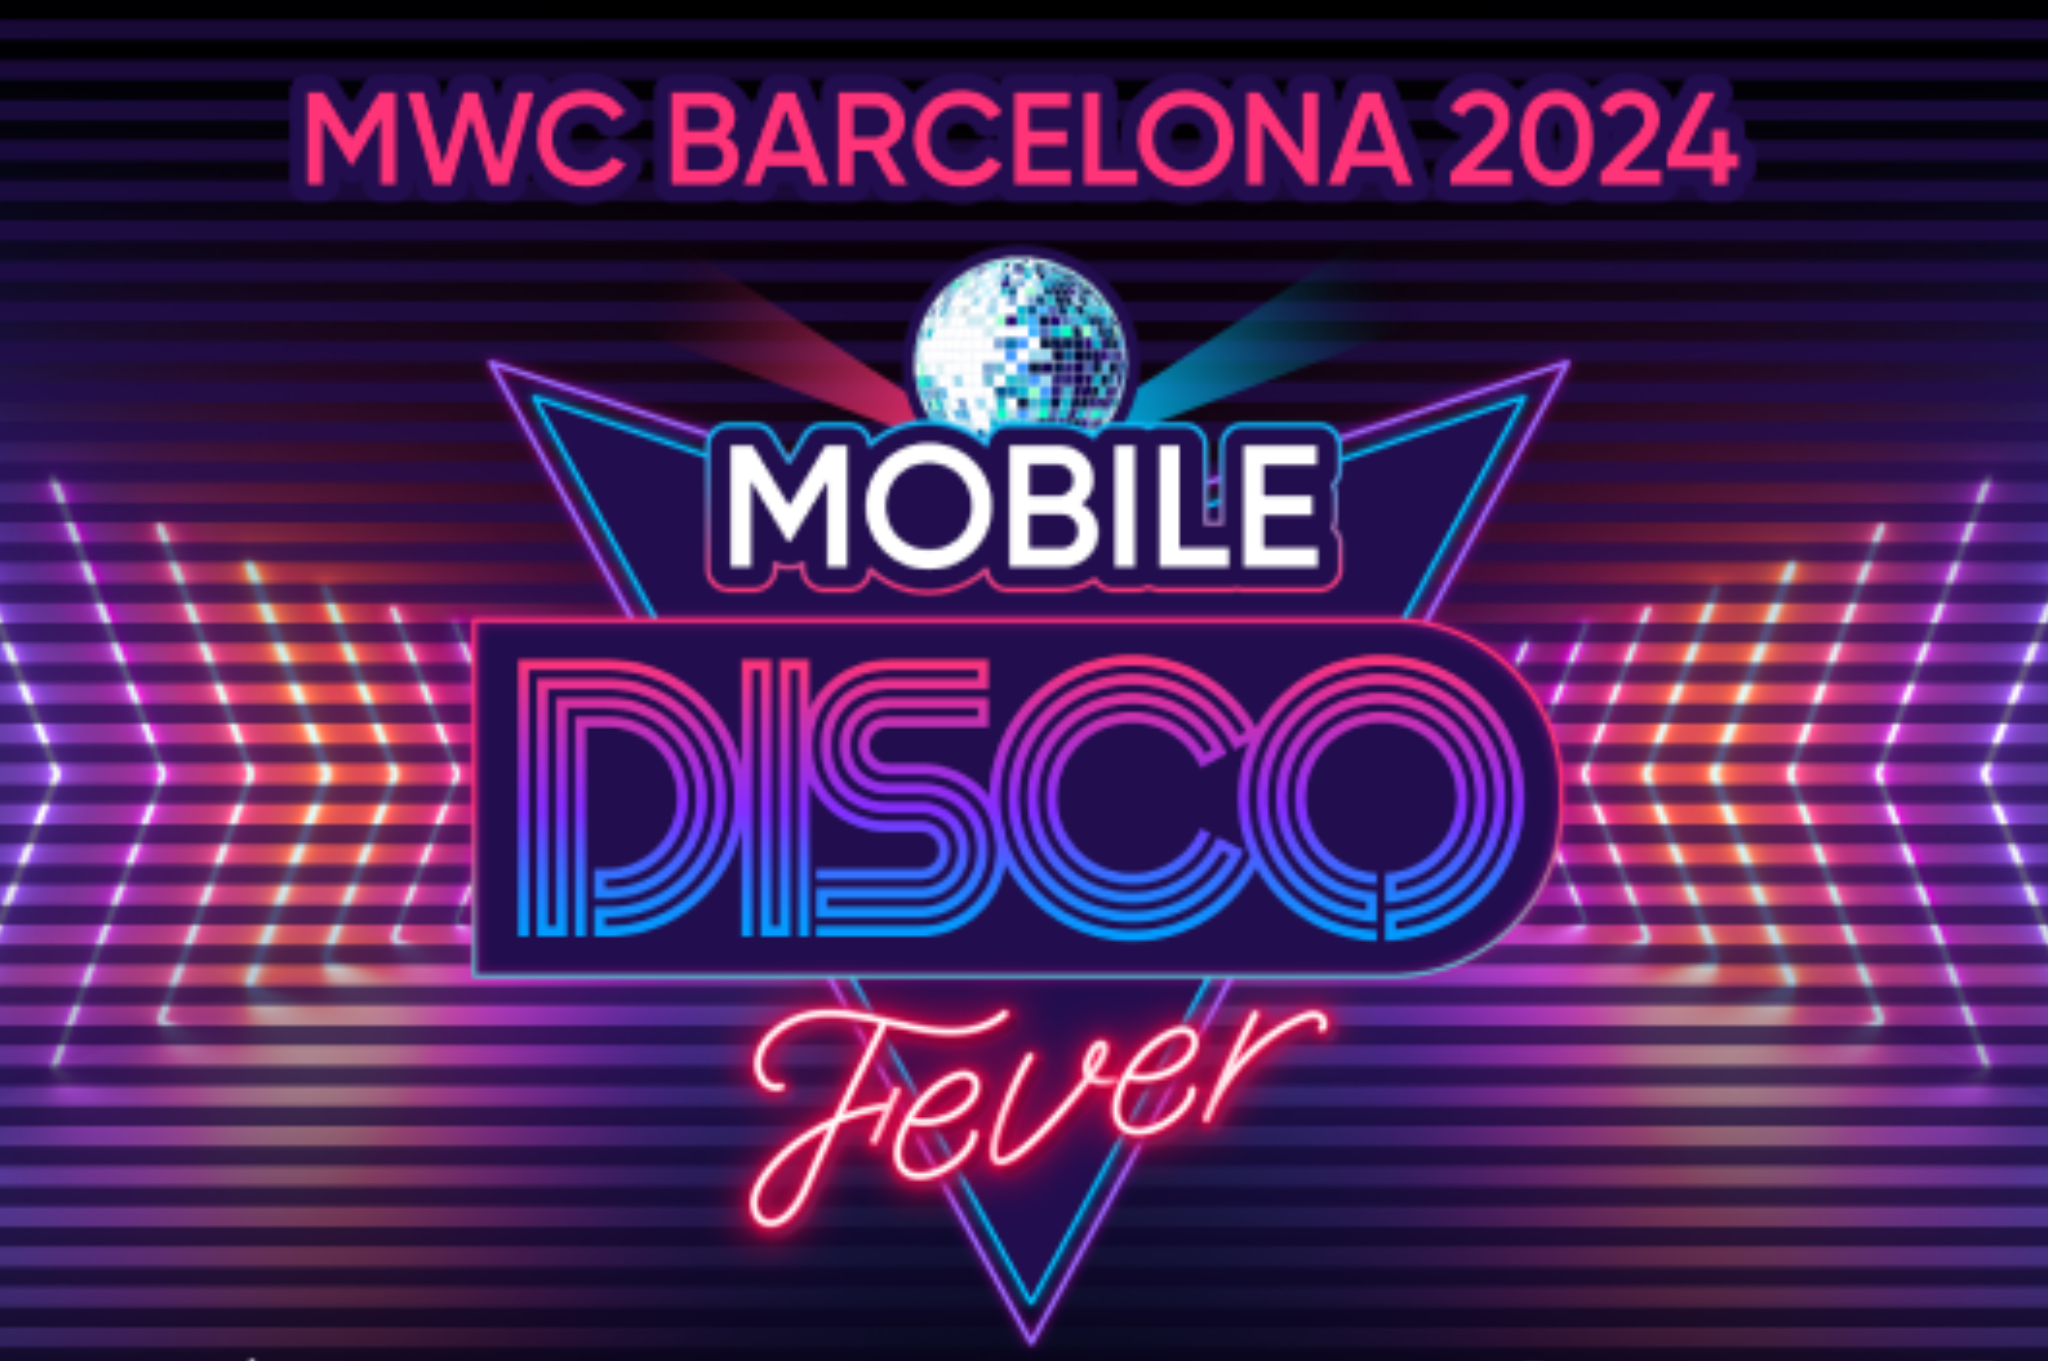 Mobile Disco Fever - MWC 2024 Party